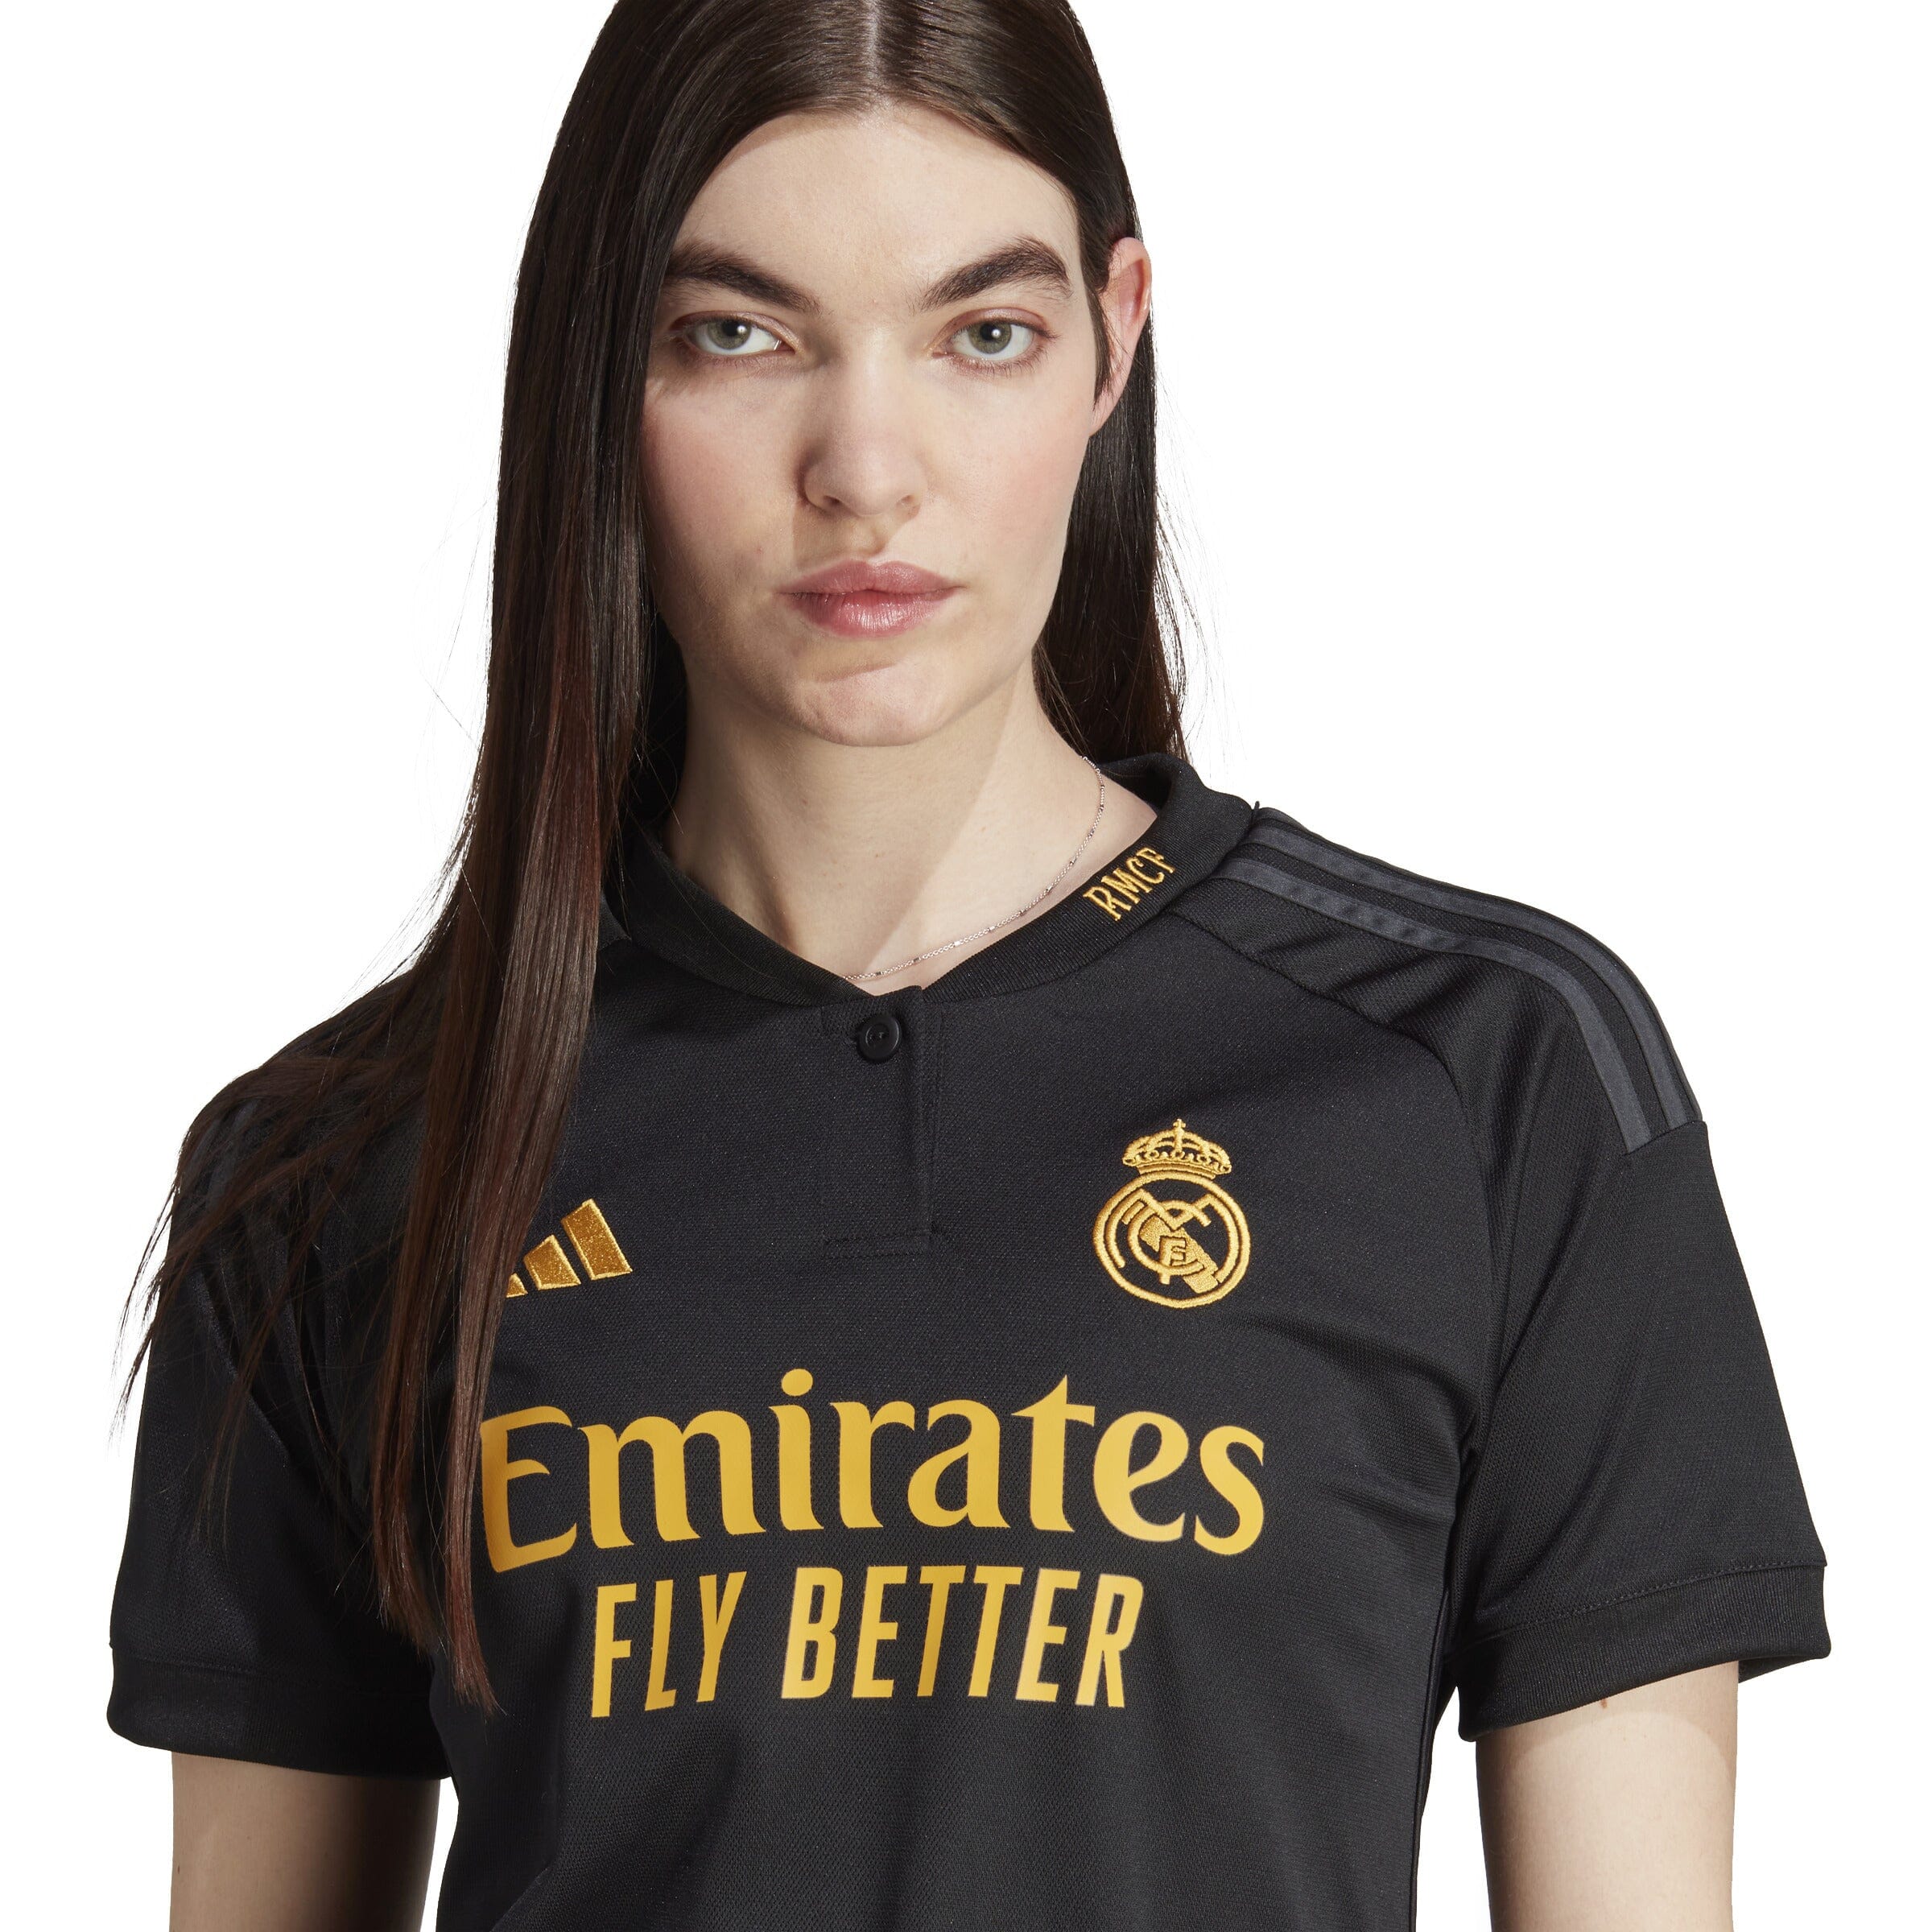  adidas Real Madrid 22/23 Third Jersey Women's, Black, Size L :  Sports & Outdoors